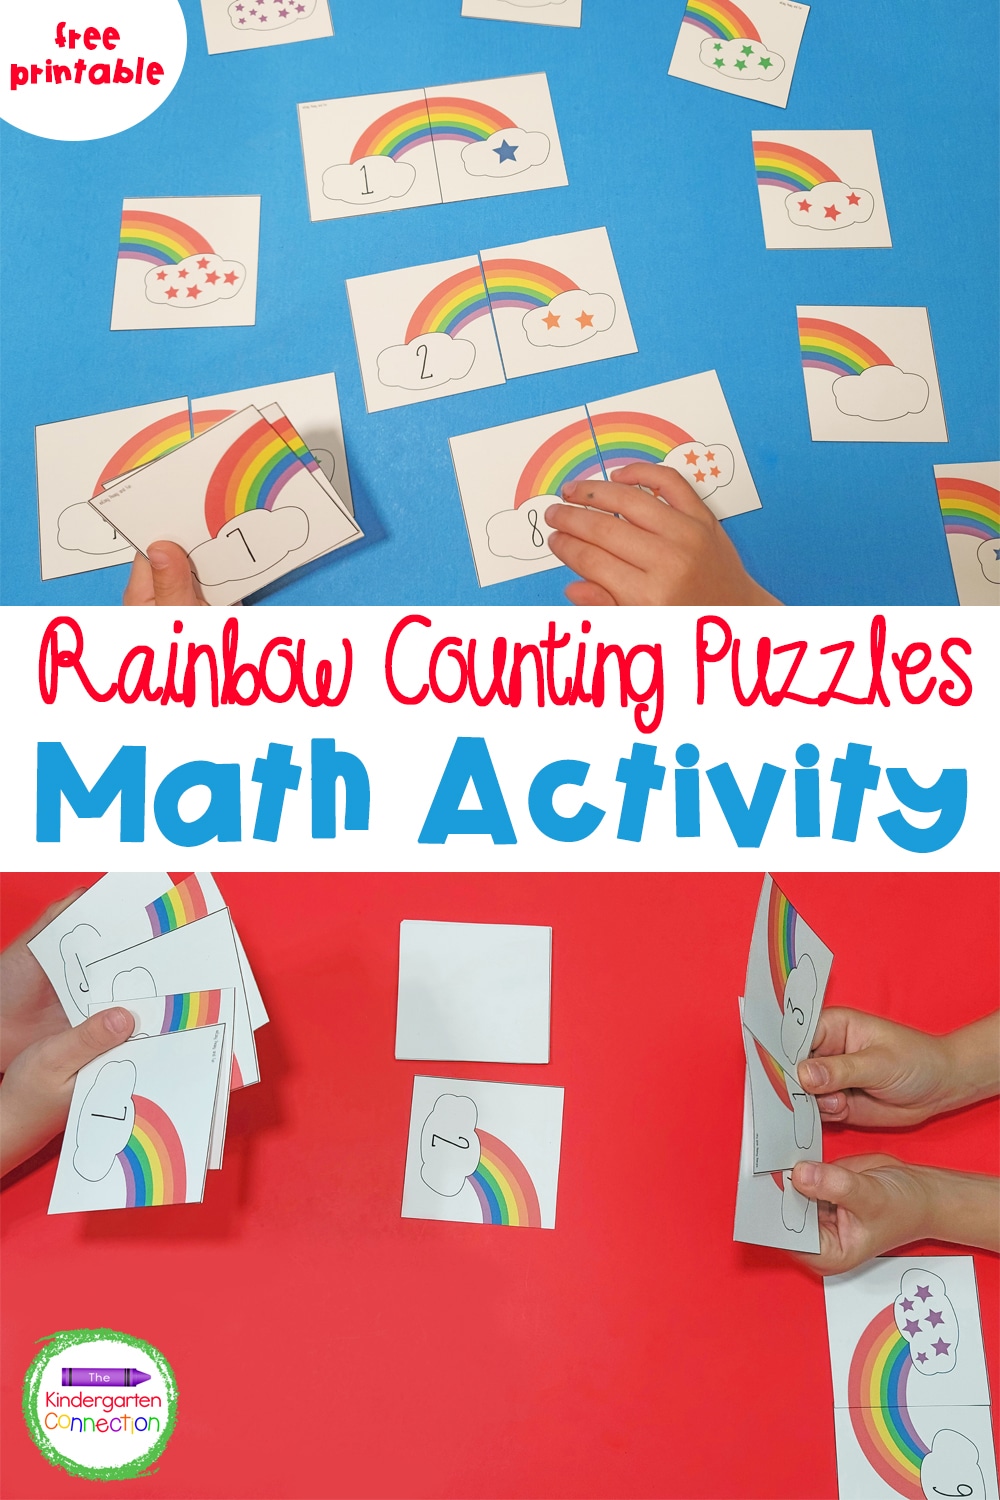 Work on important math skills with these fun and free Rainbow Counting Puzzles! They're perfect for St. Patrick's Day, spring, or anytime!